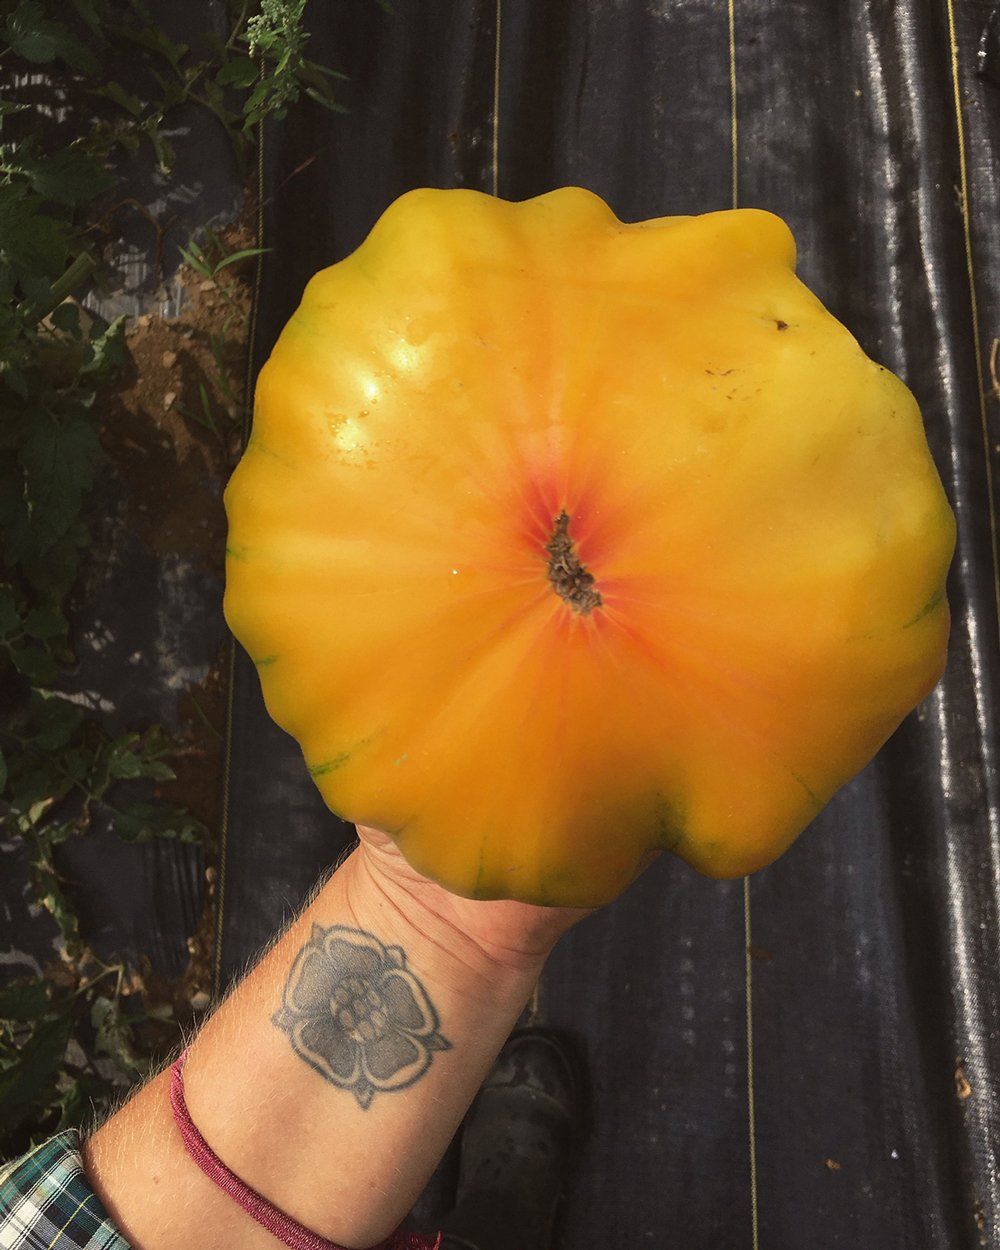 Farm Happenings for 9/15/2020: Fall Transition, Daybreak Notes & Update from Buckle Farm